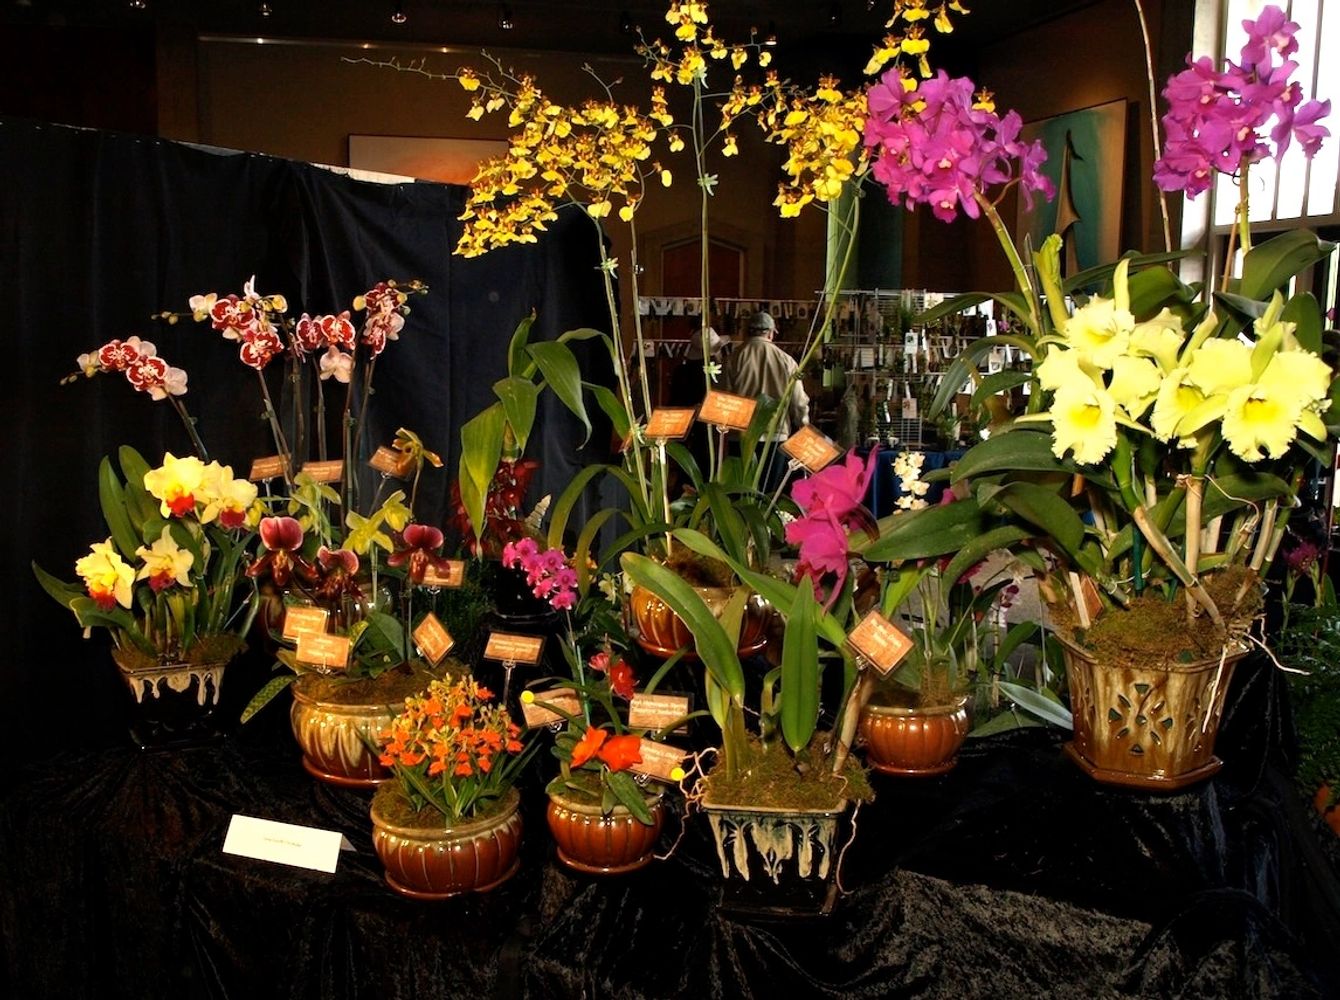 Array of orchids showing various species and hybrids.